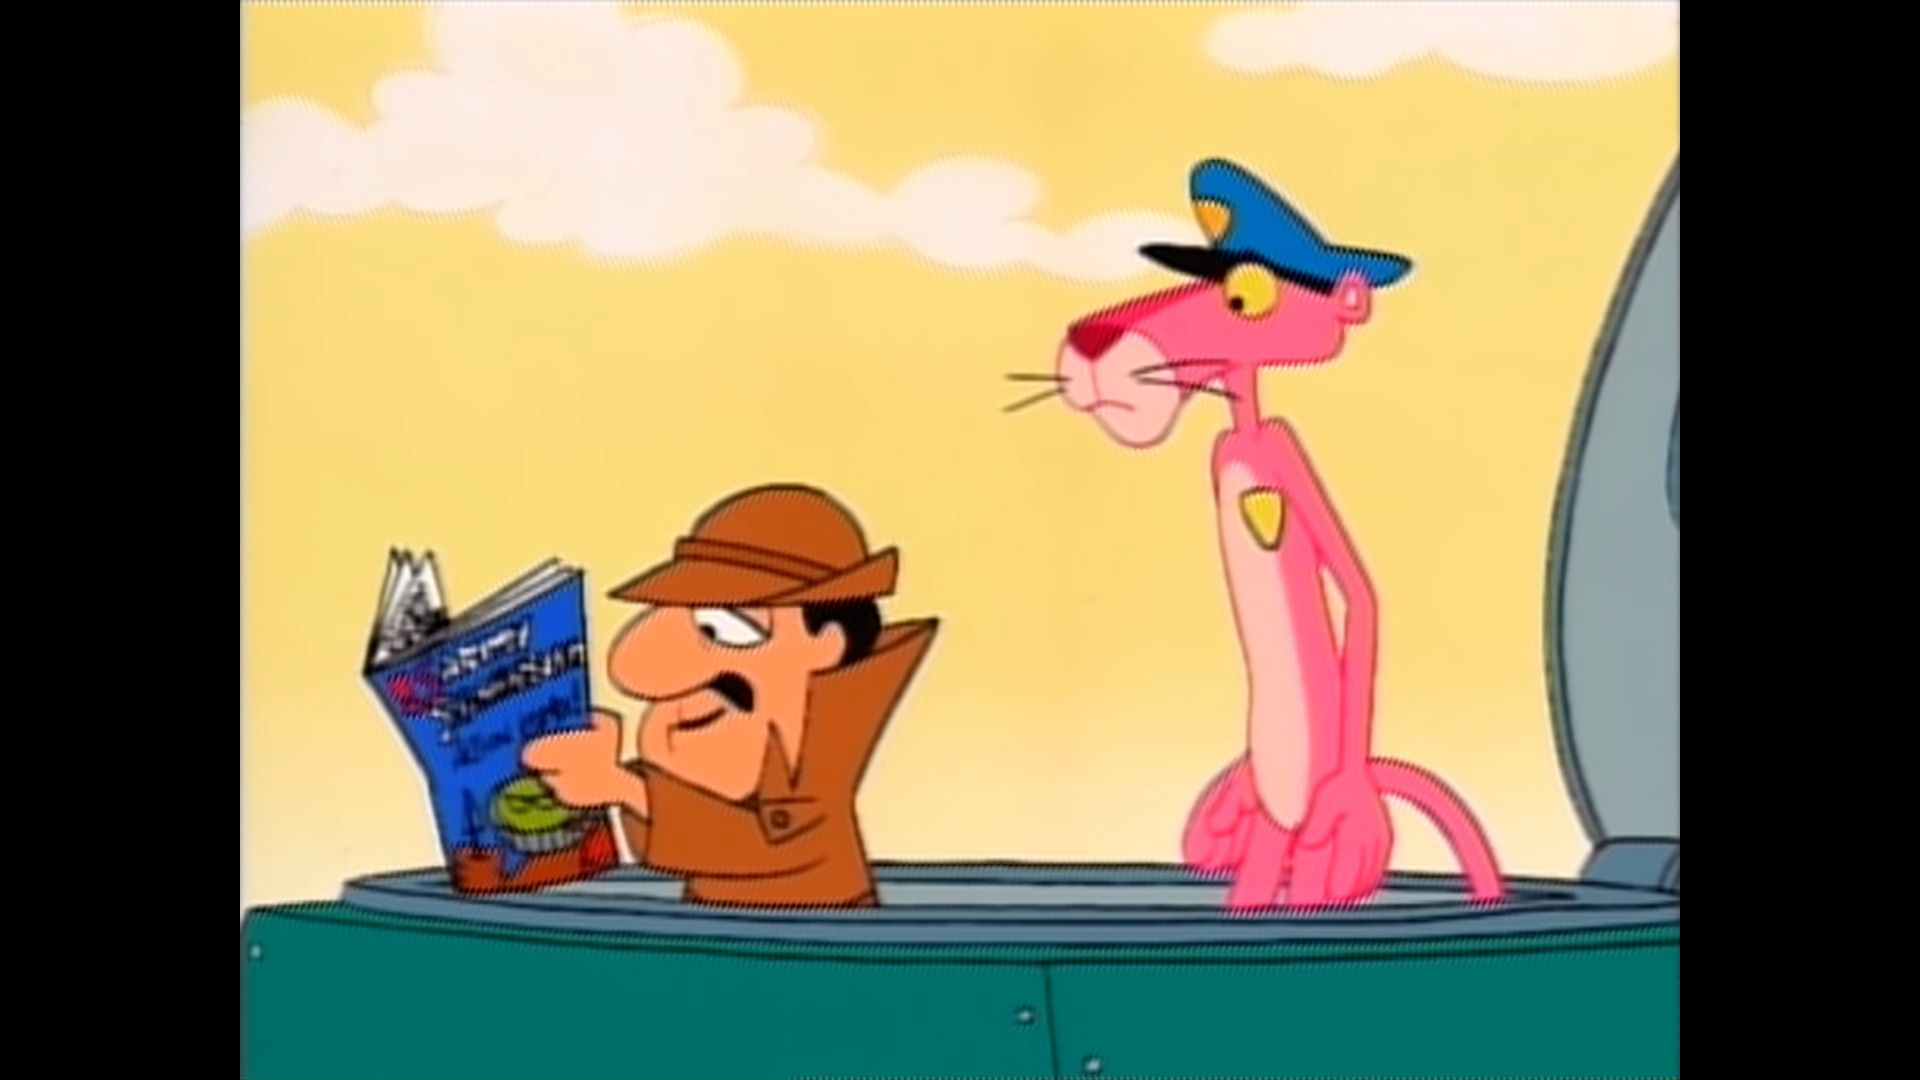 The Pink Panther background